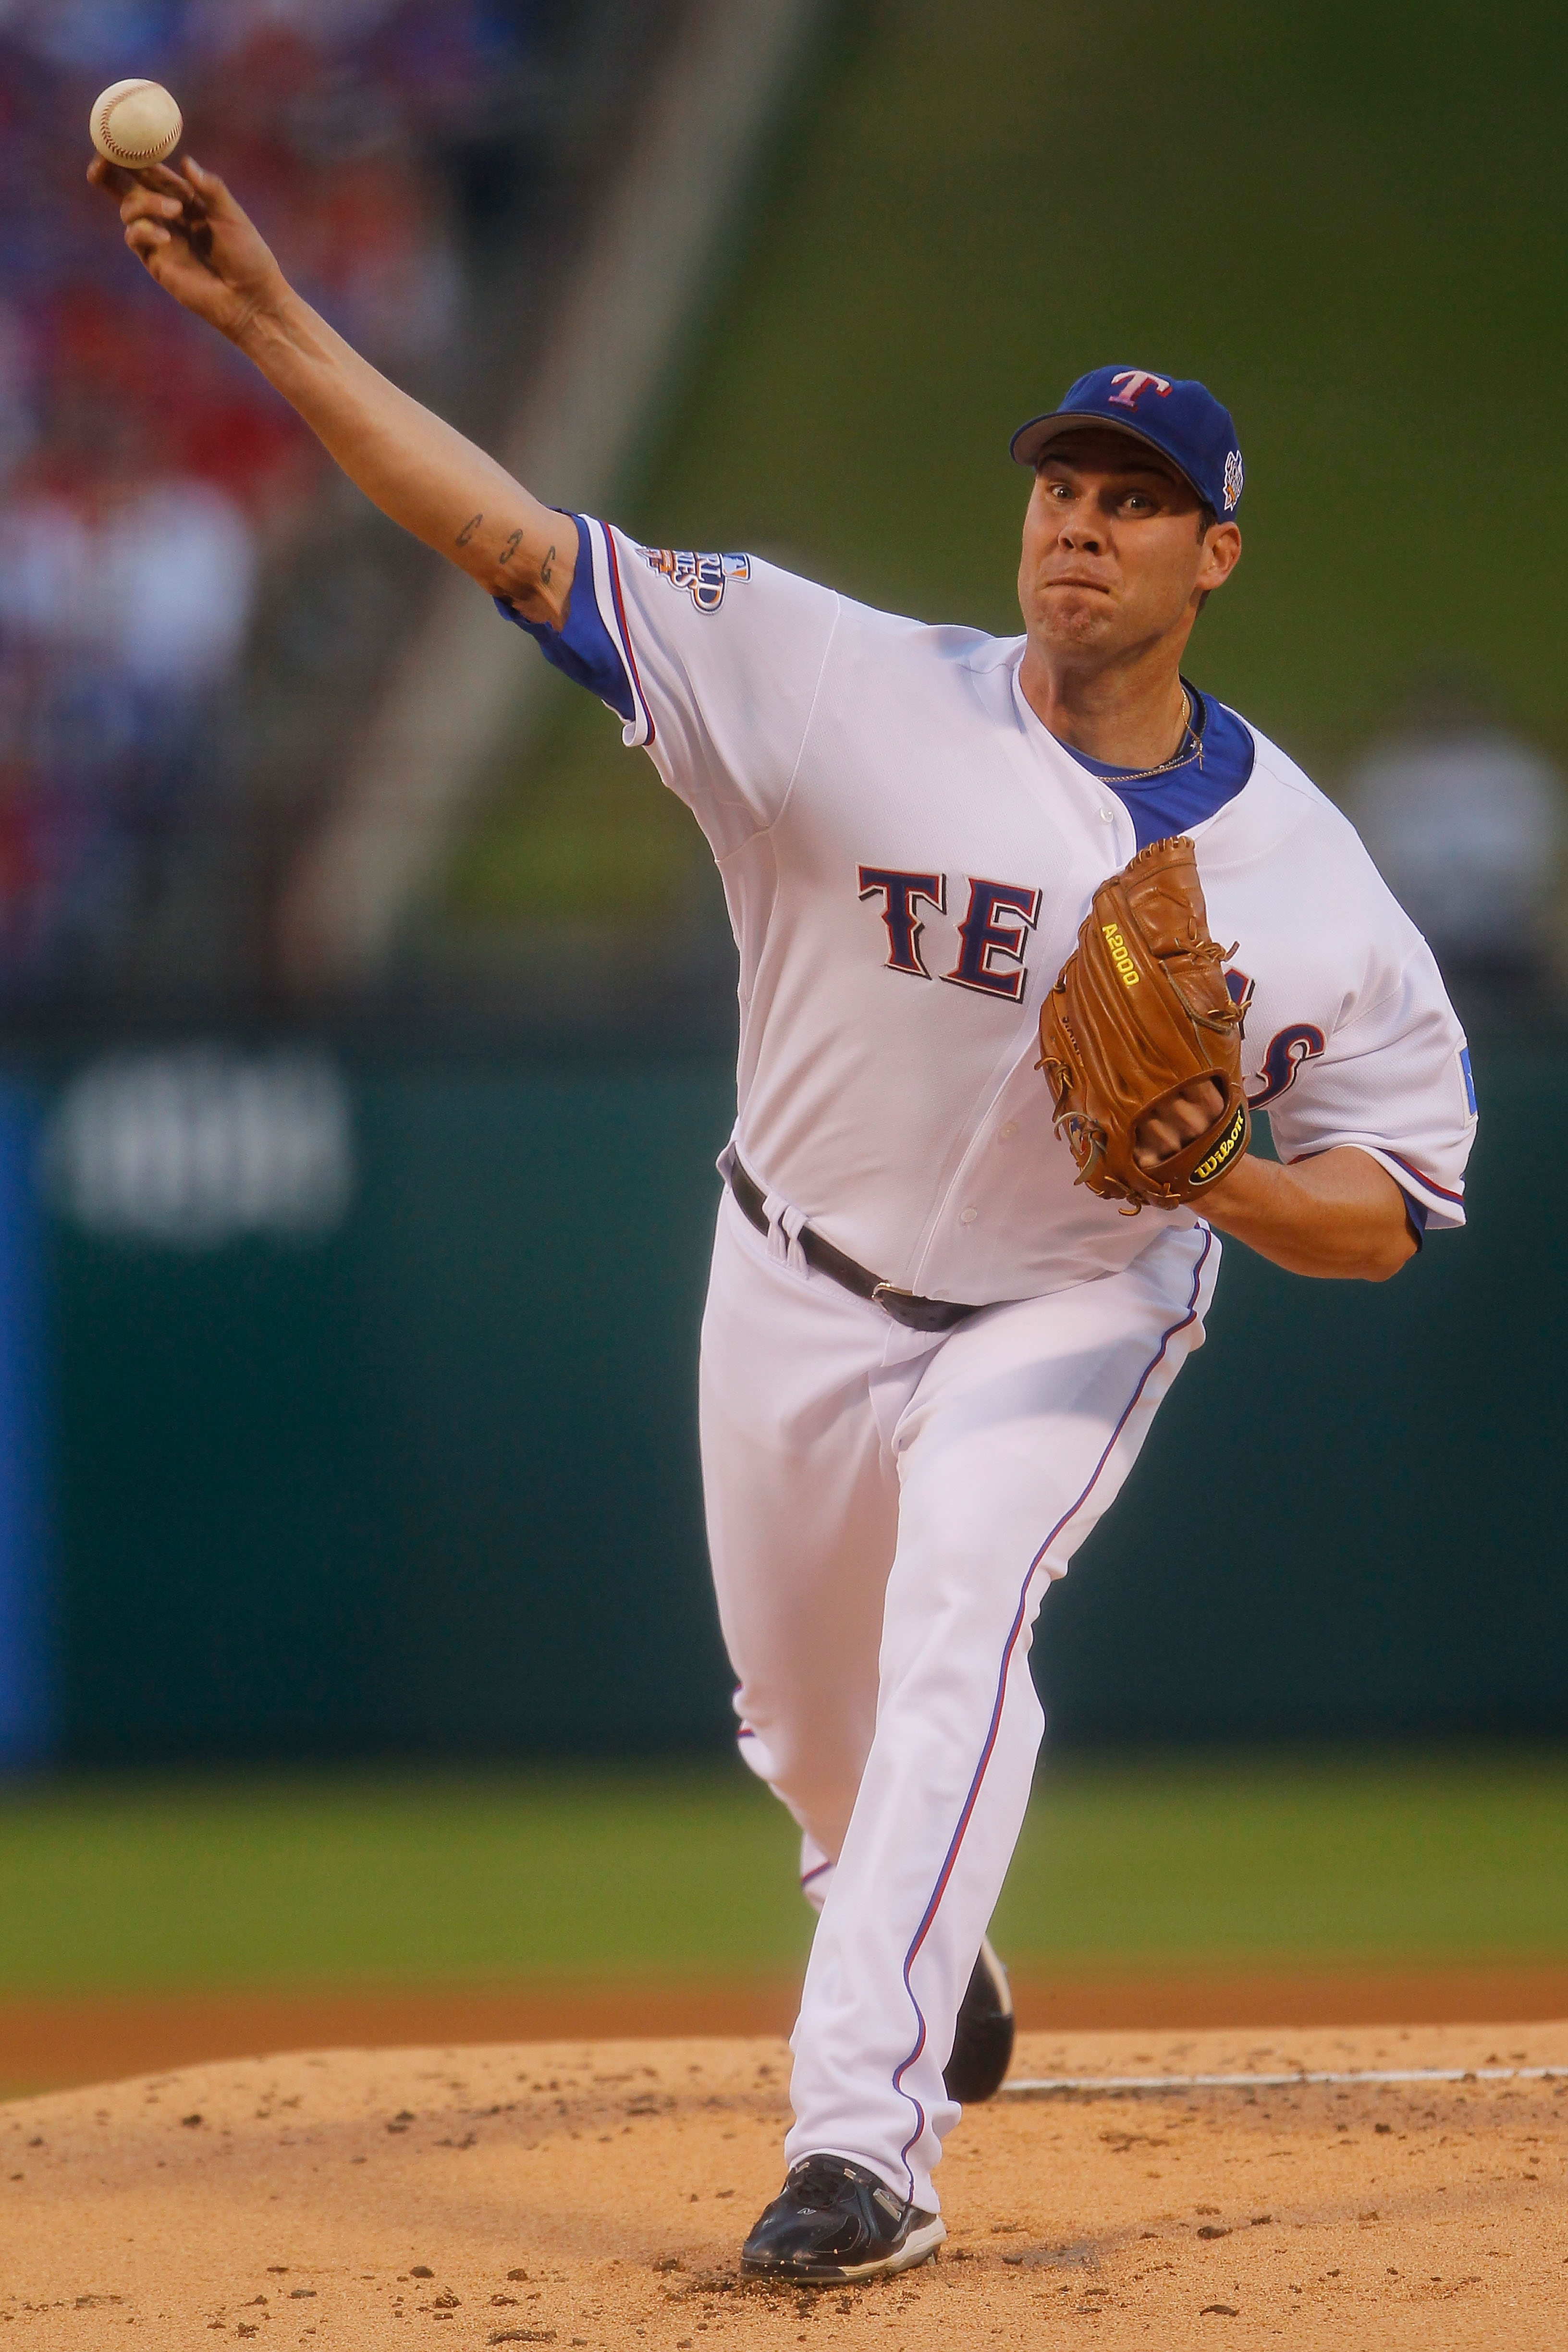 The Sunday Read: Ian Kinsler and the biggest stolen base in Rangers history  - Jeff Wilson's Texas Rangers Today